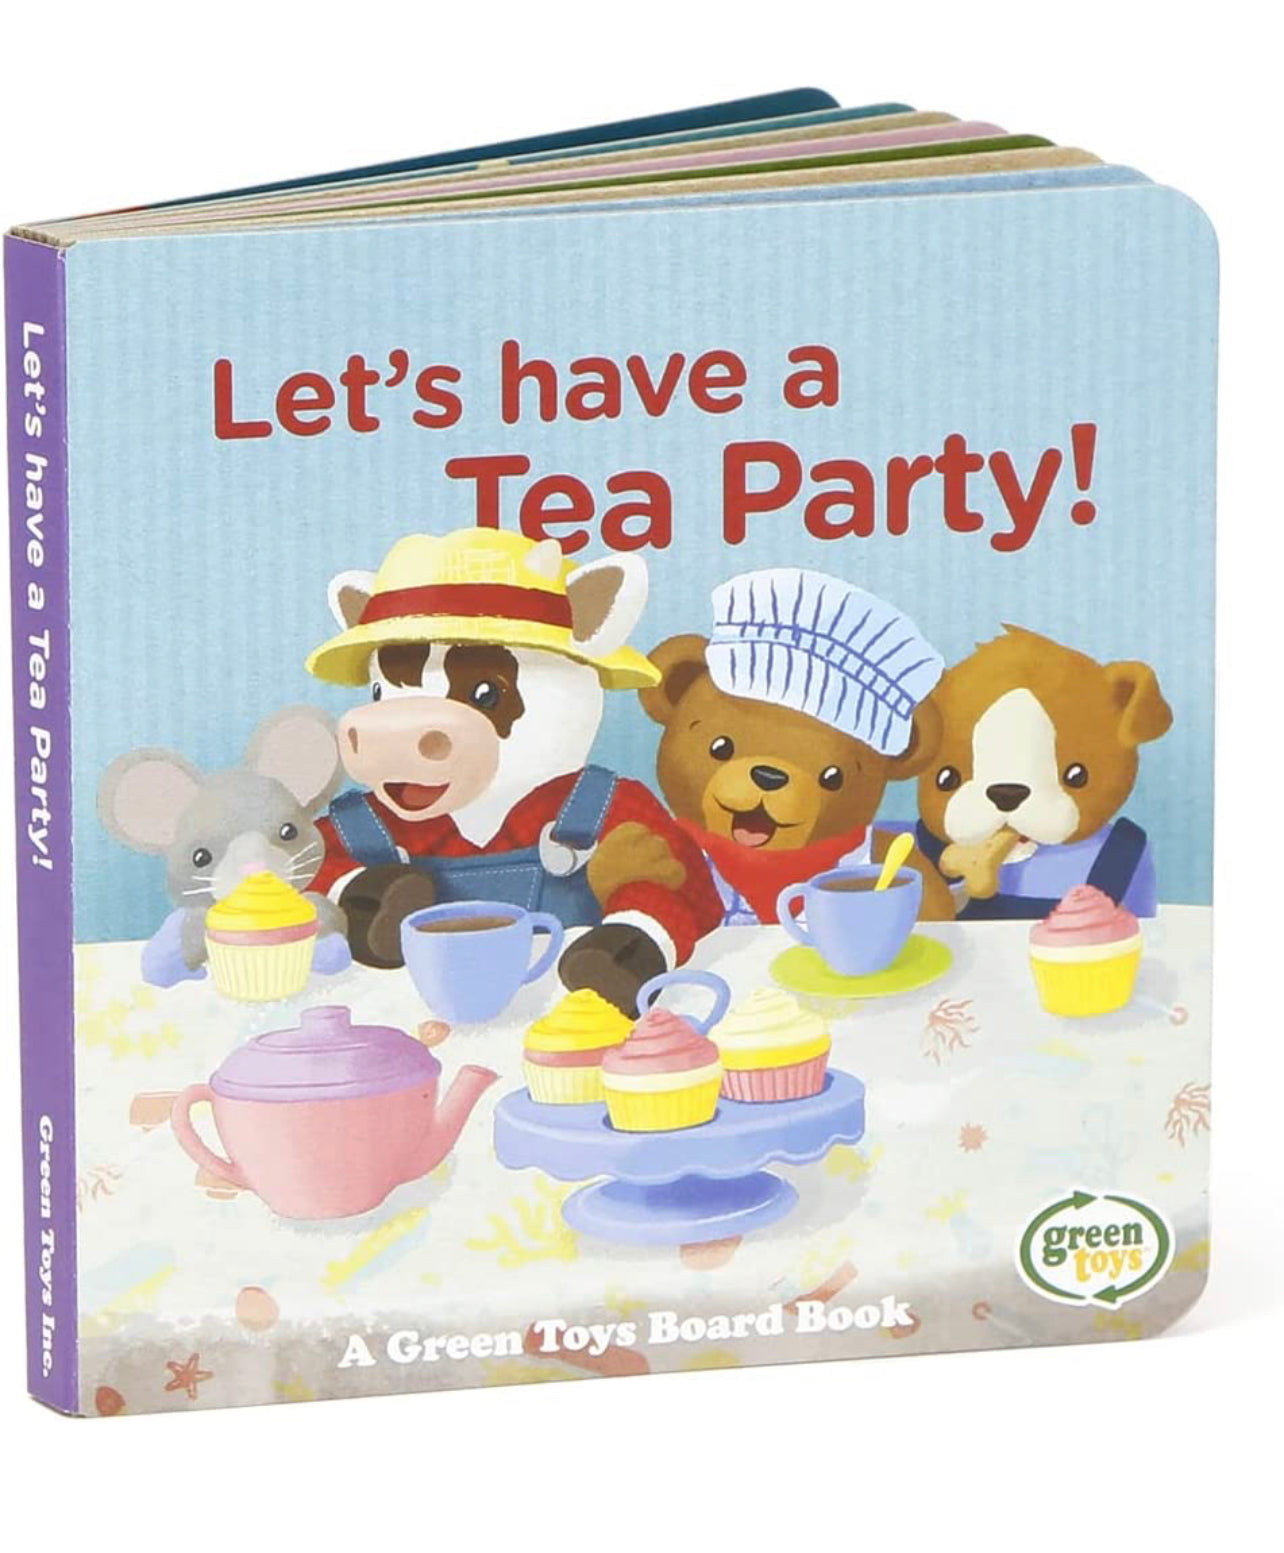 Green toys tea party set and book gift